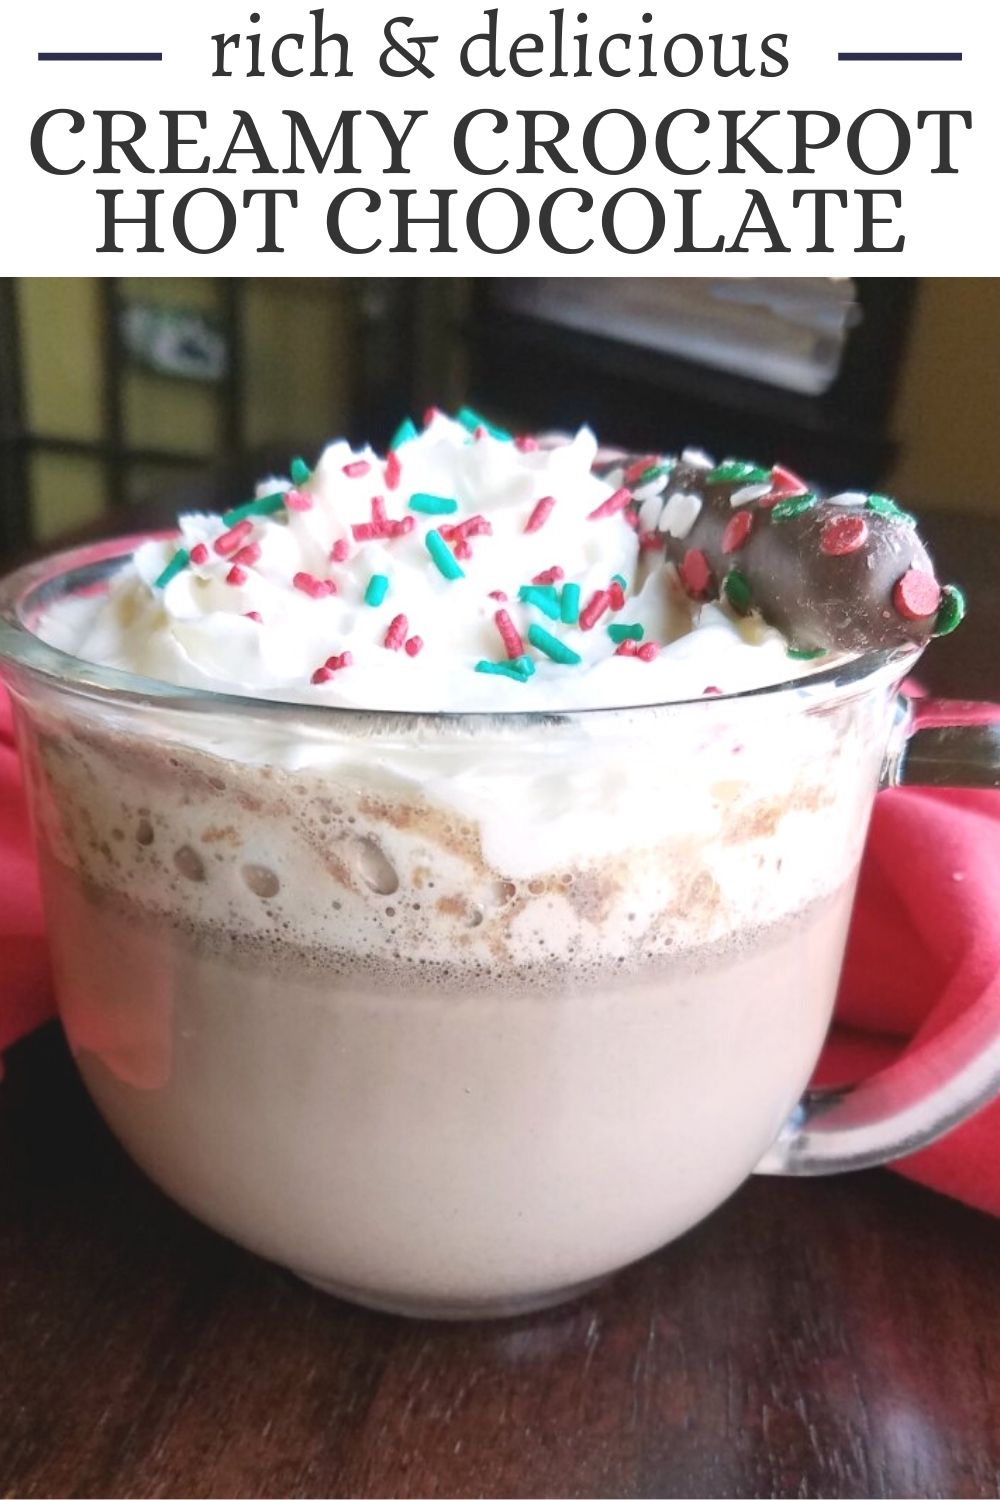 Hot chocolate is a must have on a cold winter day. There is just something about coming in from an afternoon of sledding and snowman making and having a cup of cocoa waiting. This version is super creamy and chocolaty and the crockpot does the work while you play.